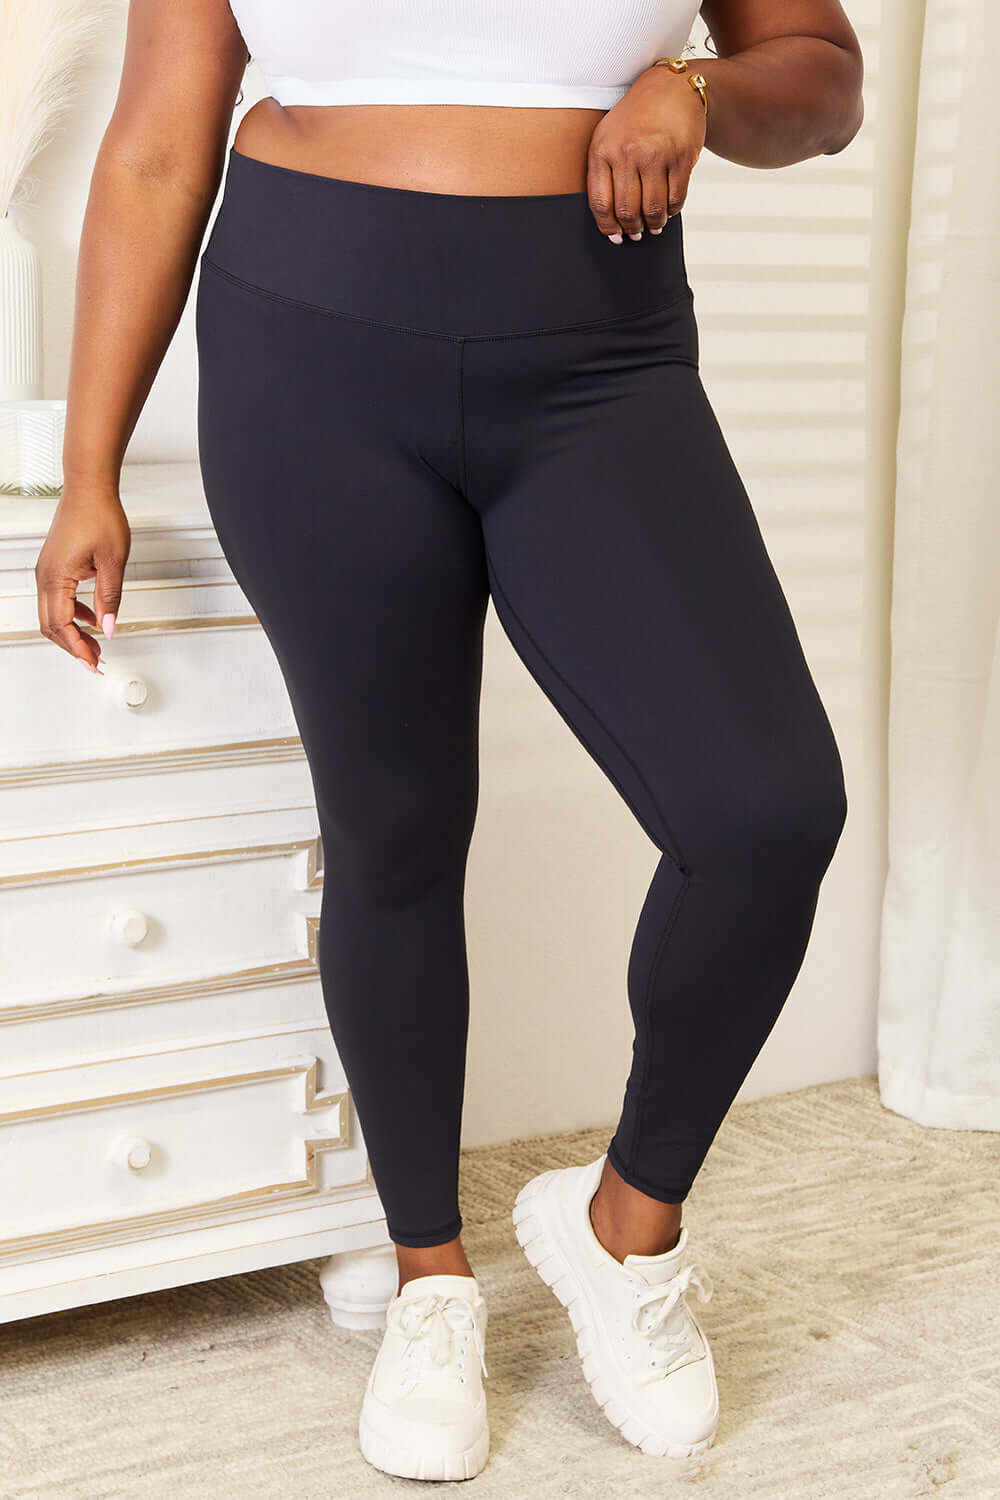 DOUBLE TAKE Wide Waistband Sports Leggings at Bella Road